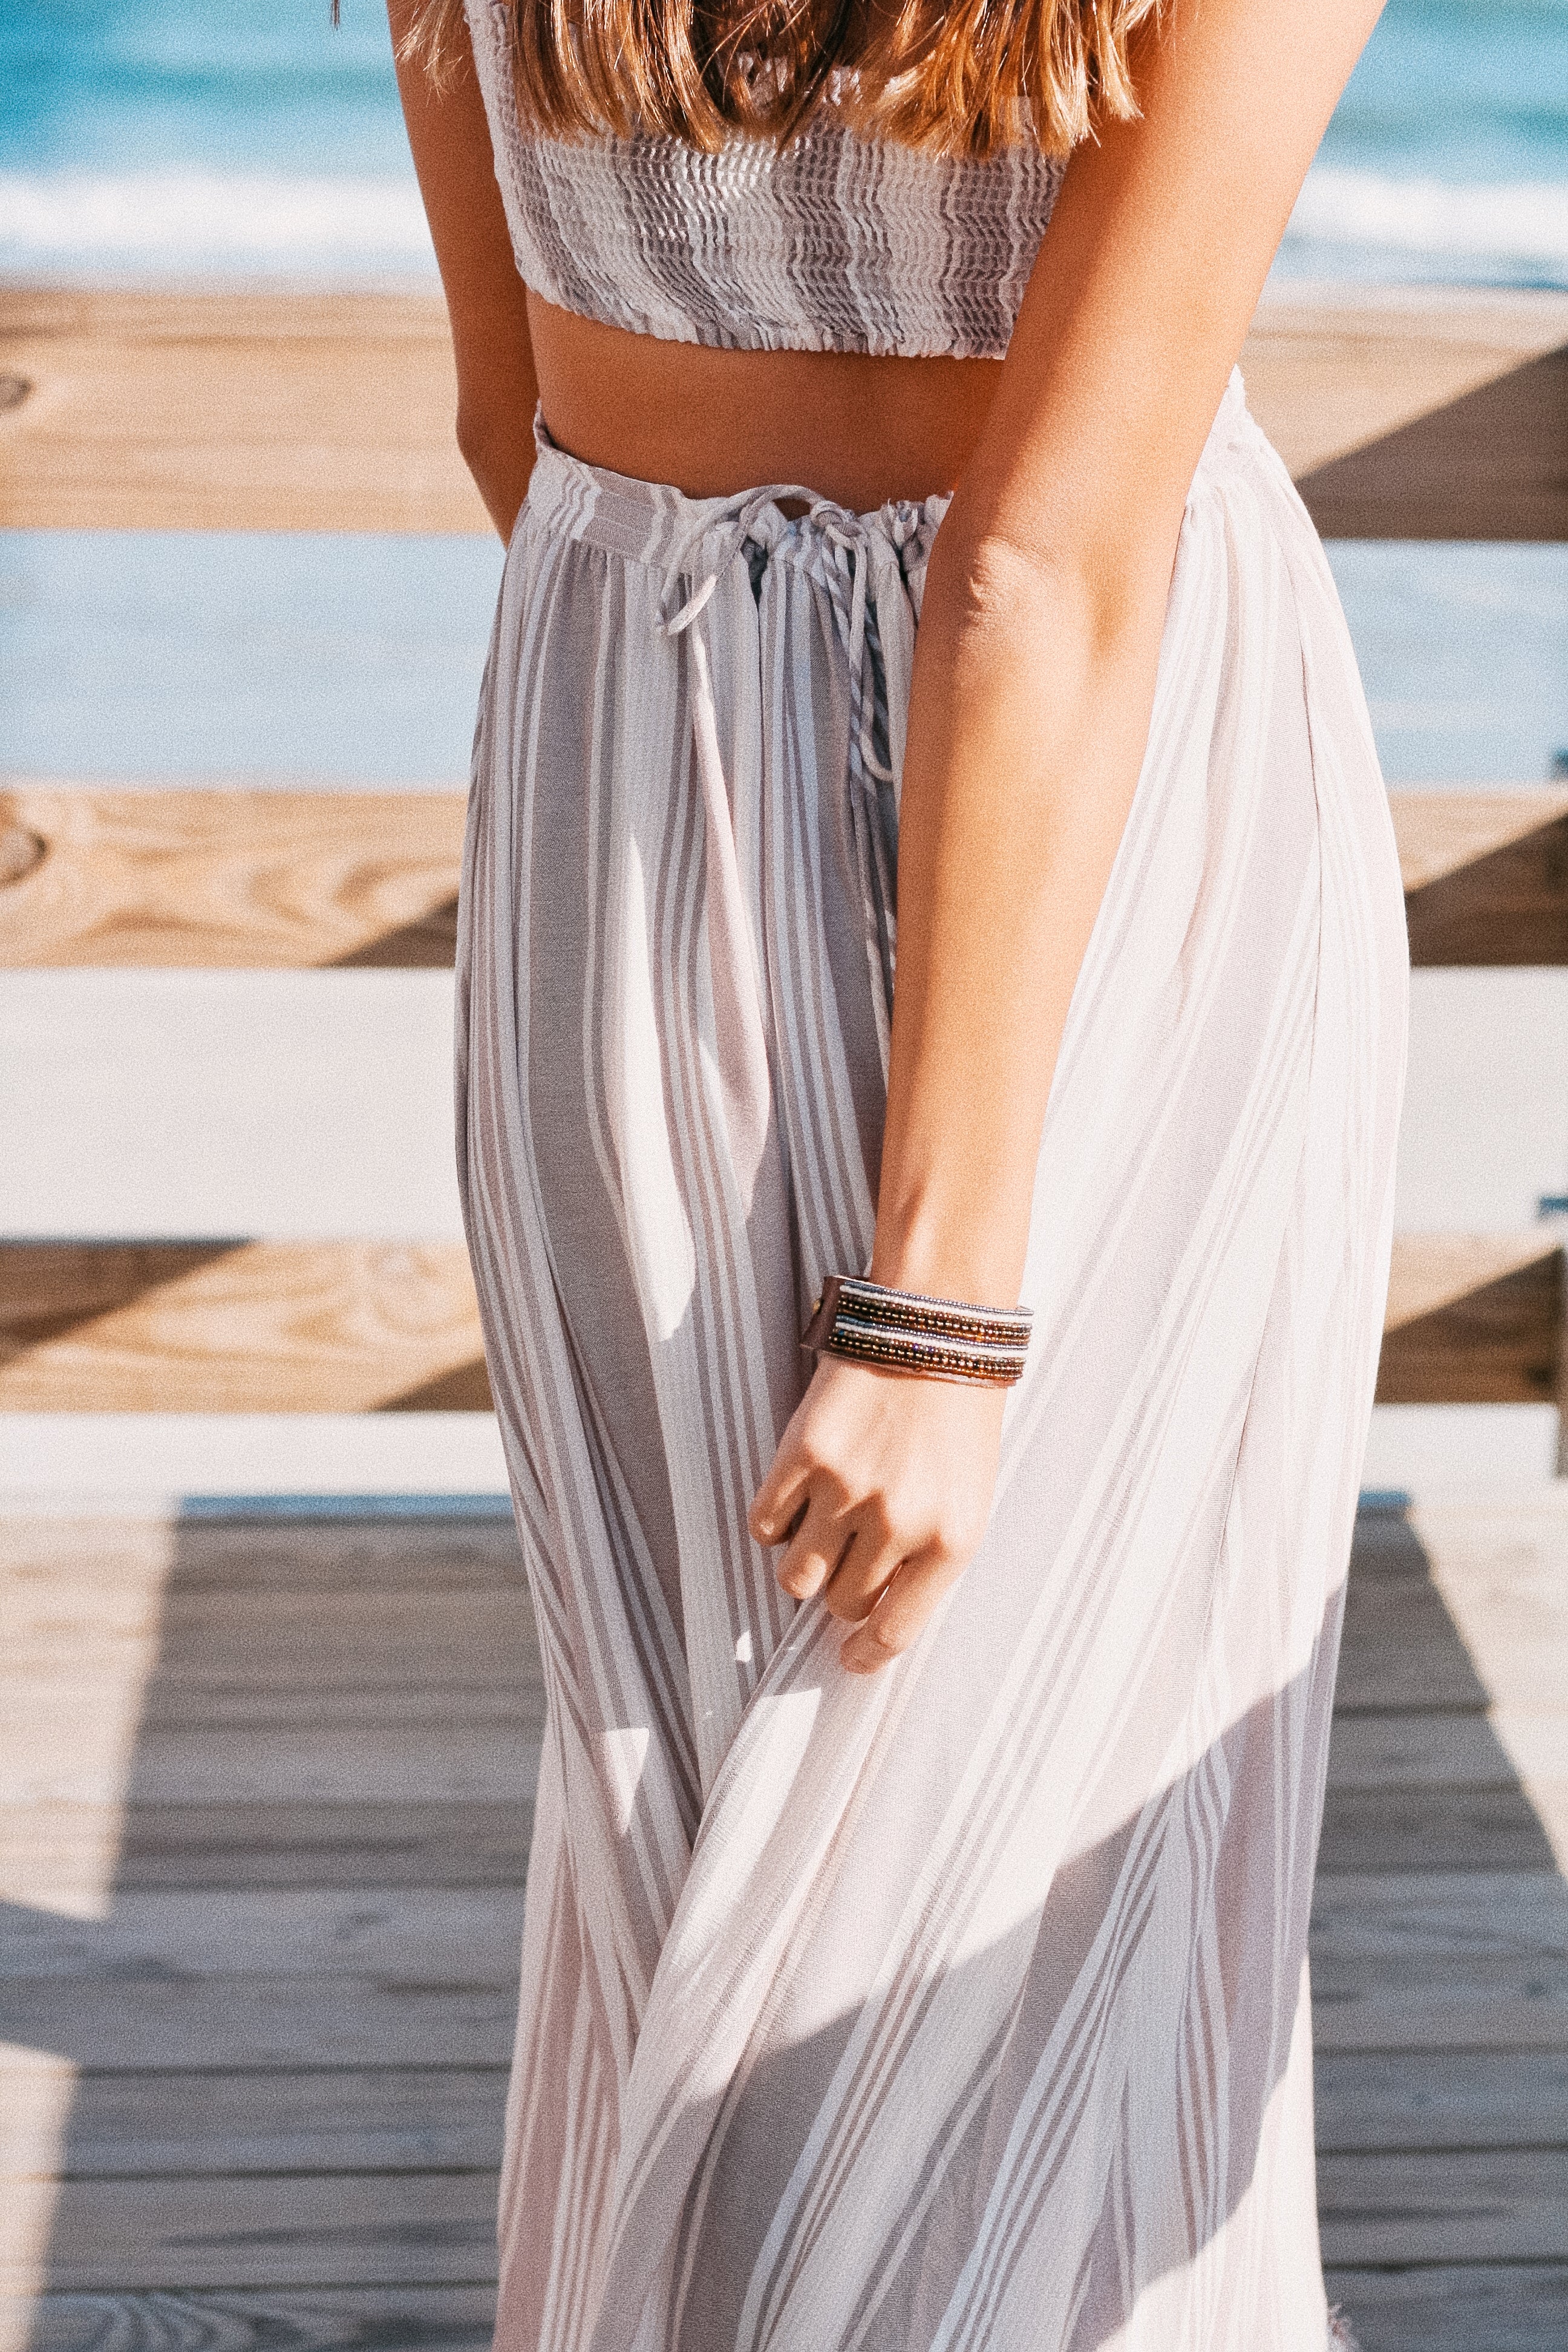 Stripes Neutral Beaded Leather Cuff